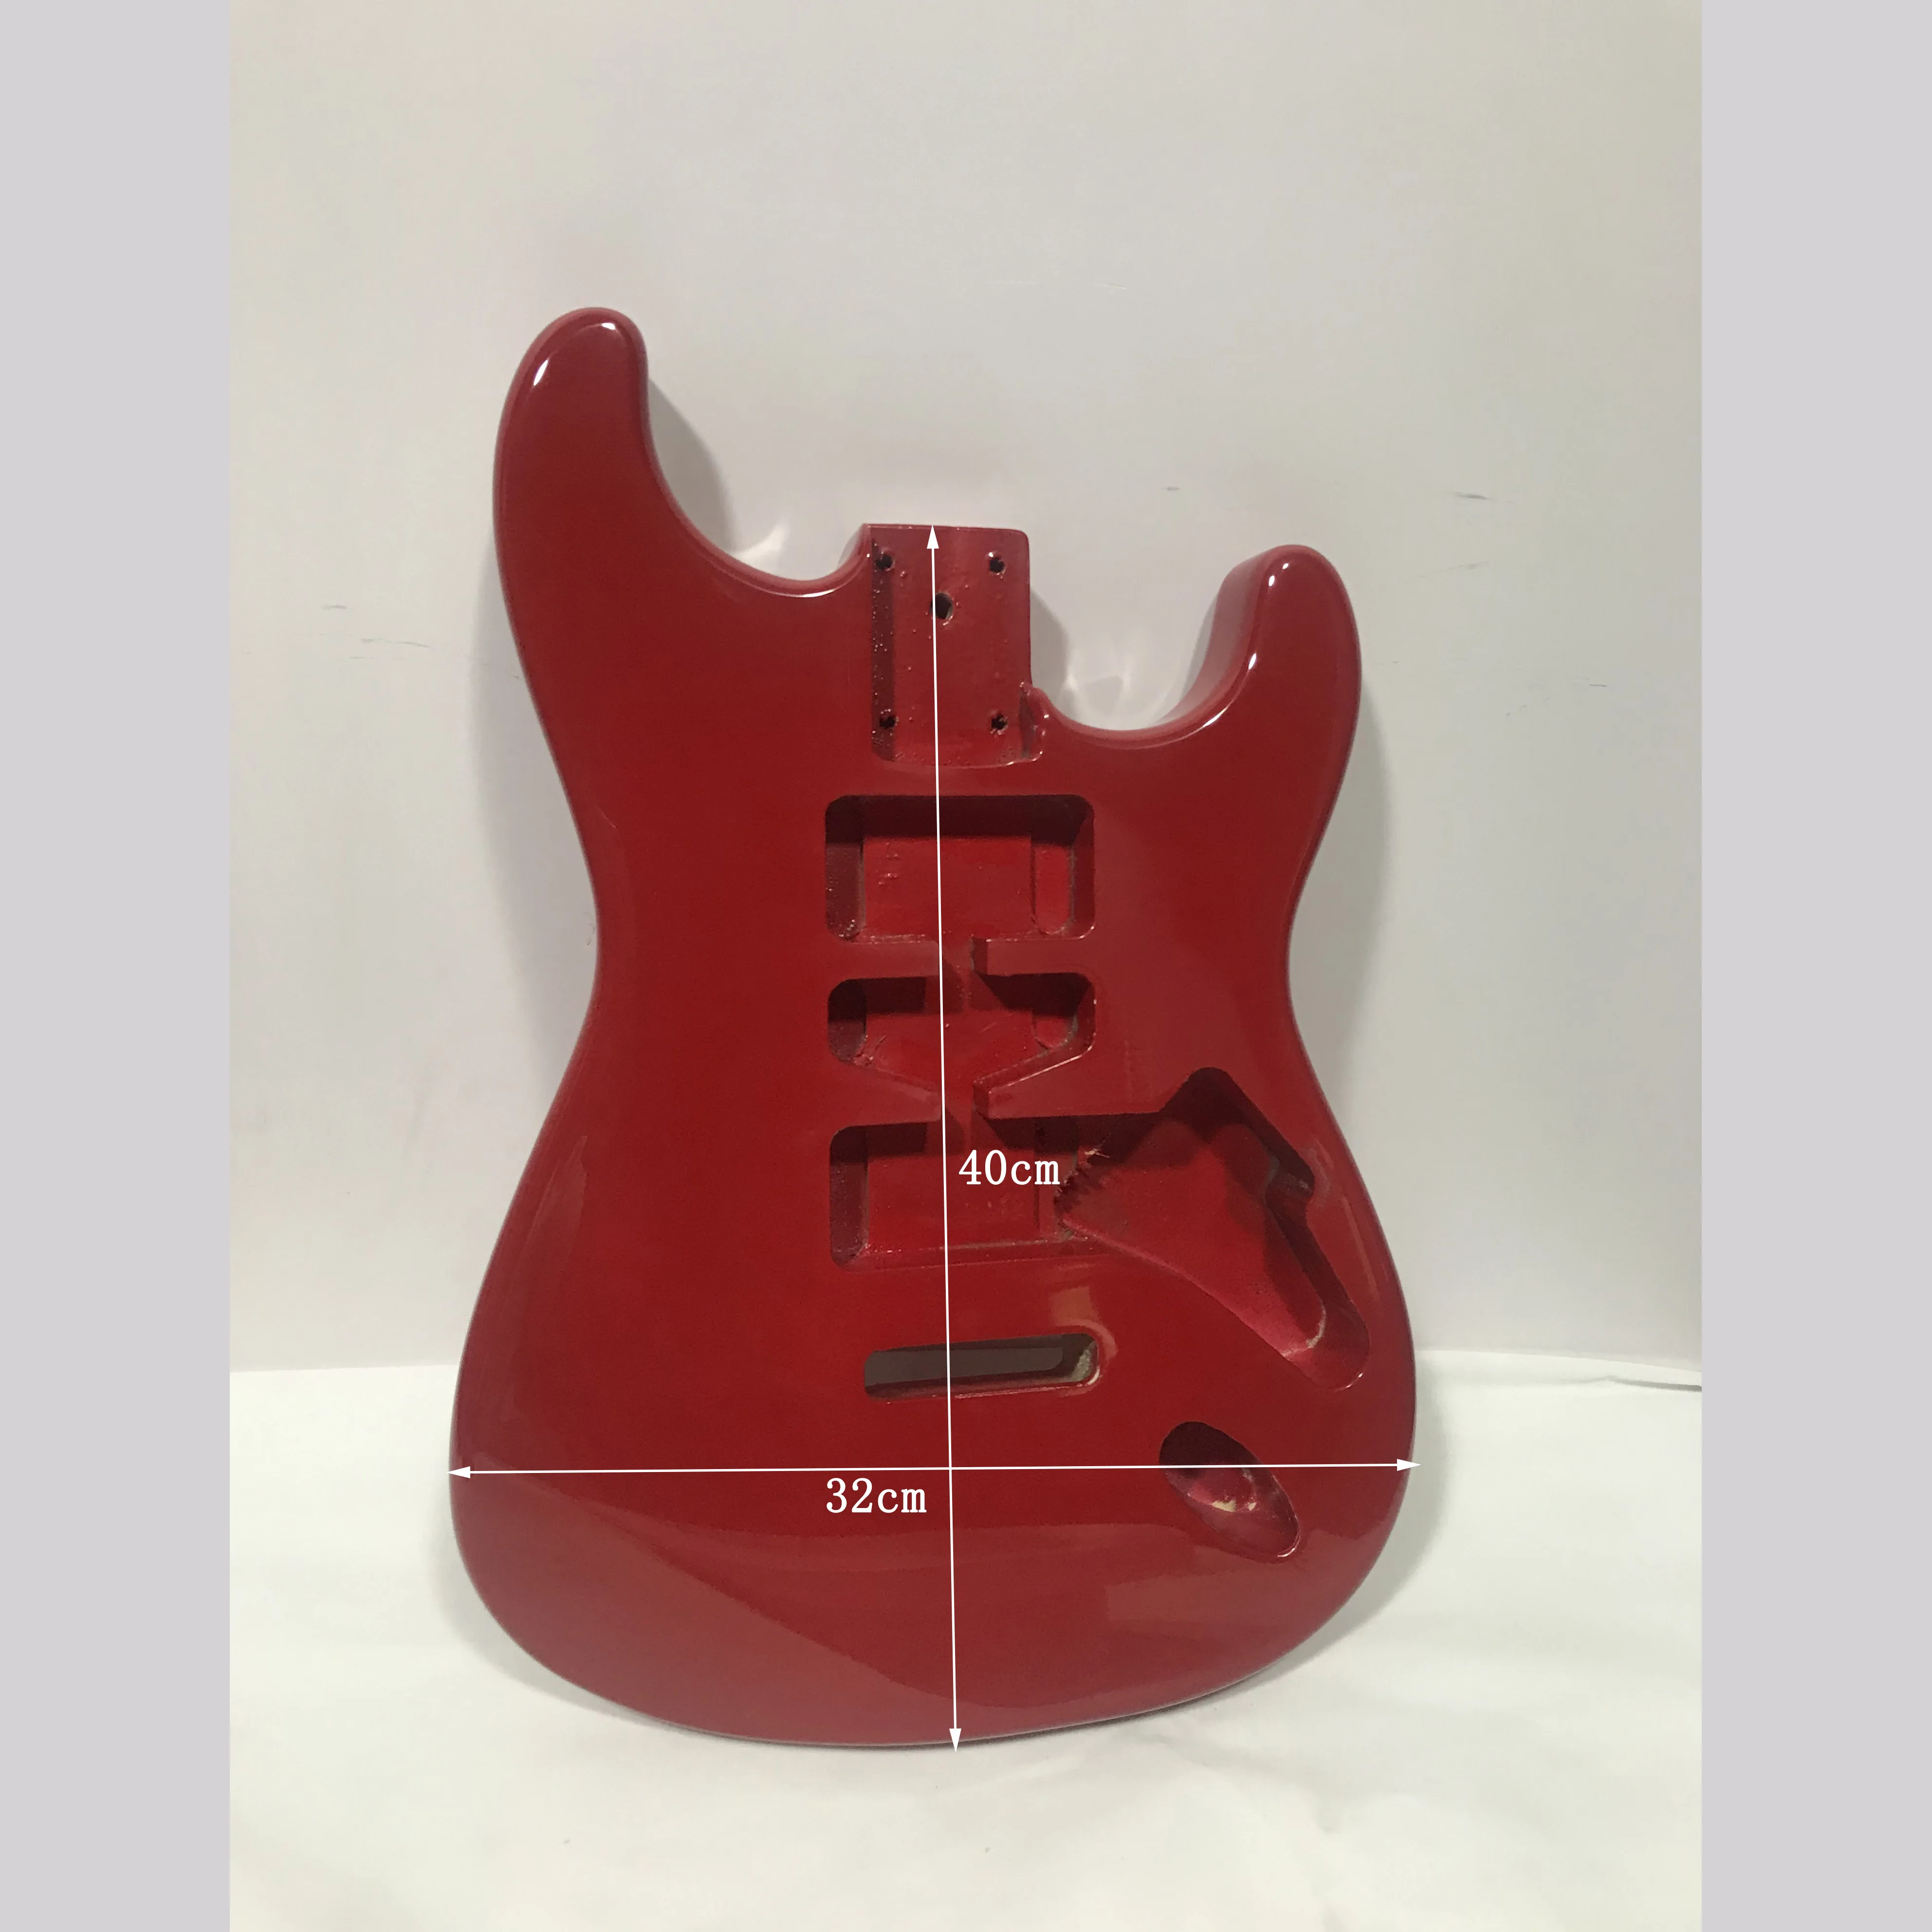 

DIY Electric Guitar Body Unfinished Simi Finished Guitar in High Quality Left Handed Guitar Afanti Music ASH body